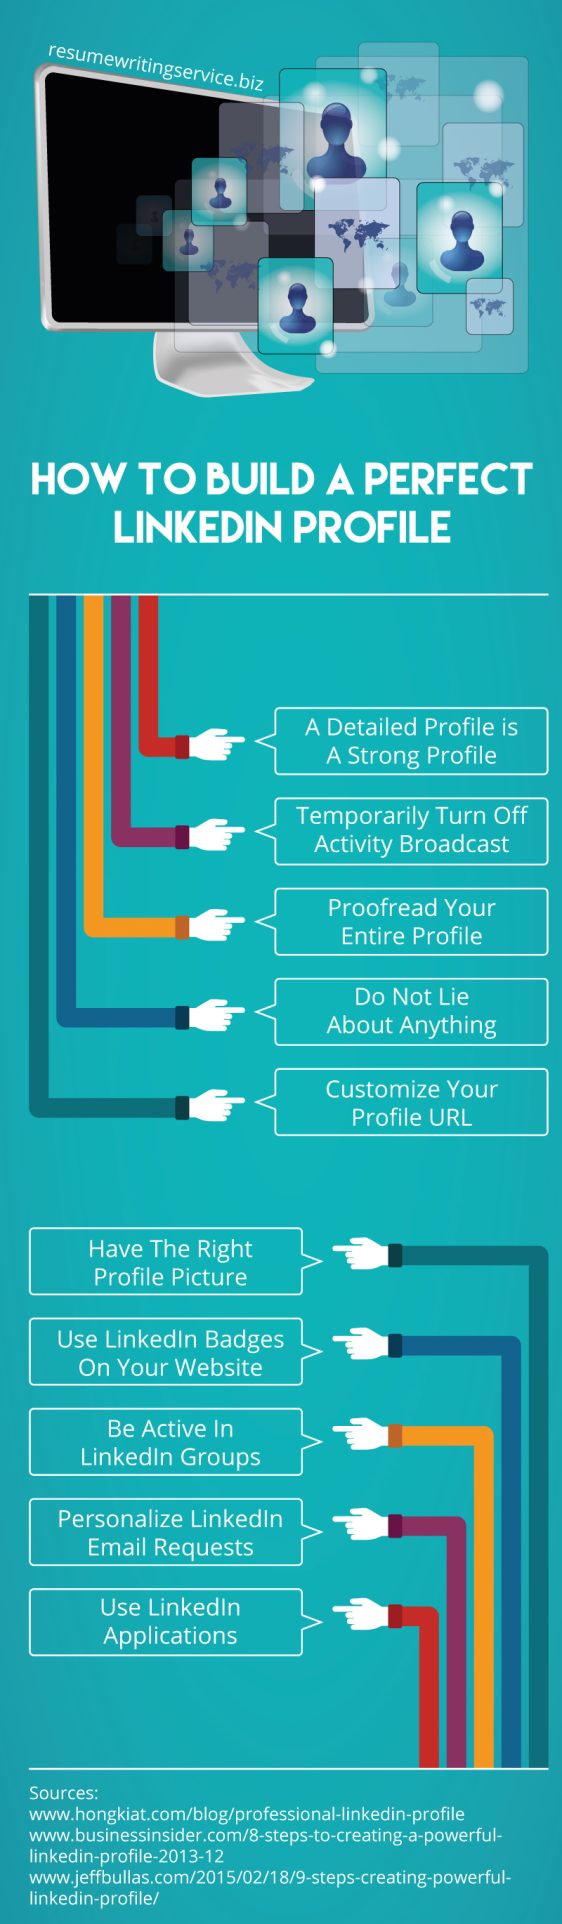 How to Build a Perfect LinkedIn Profile